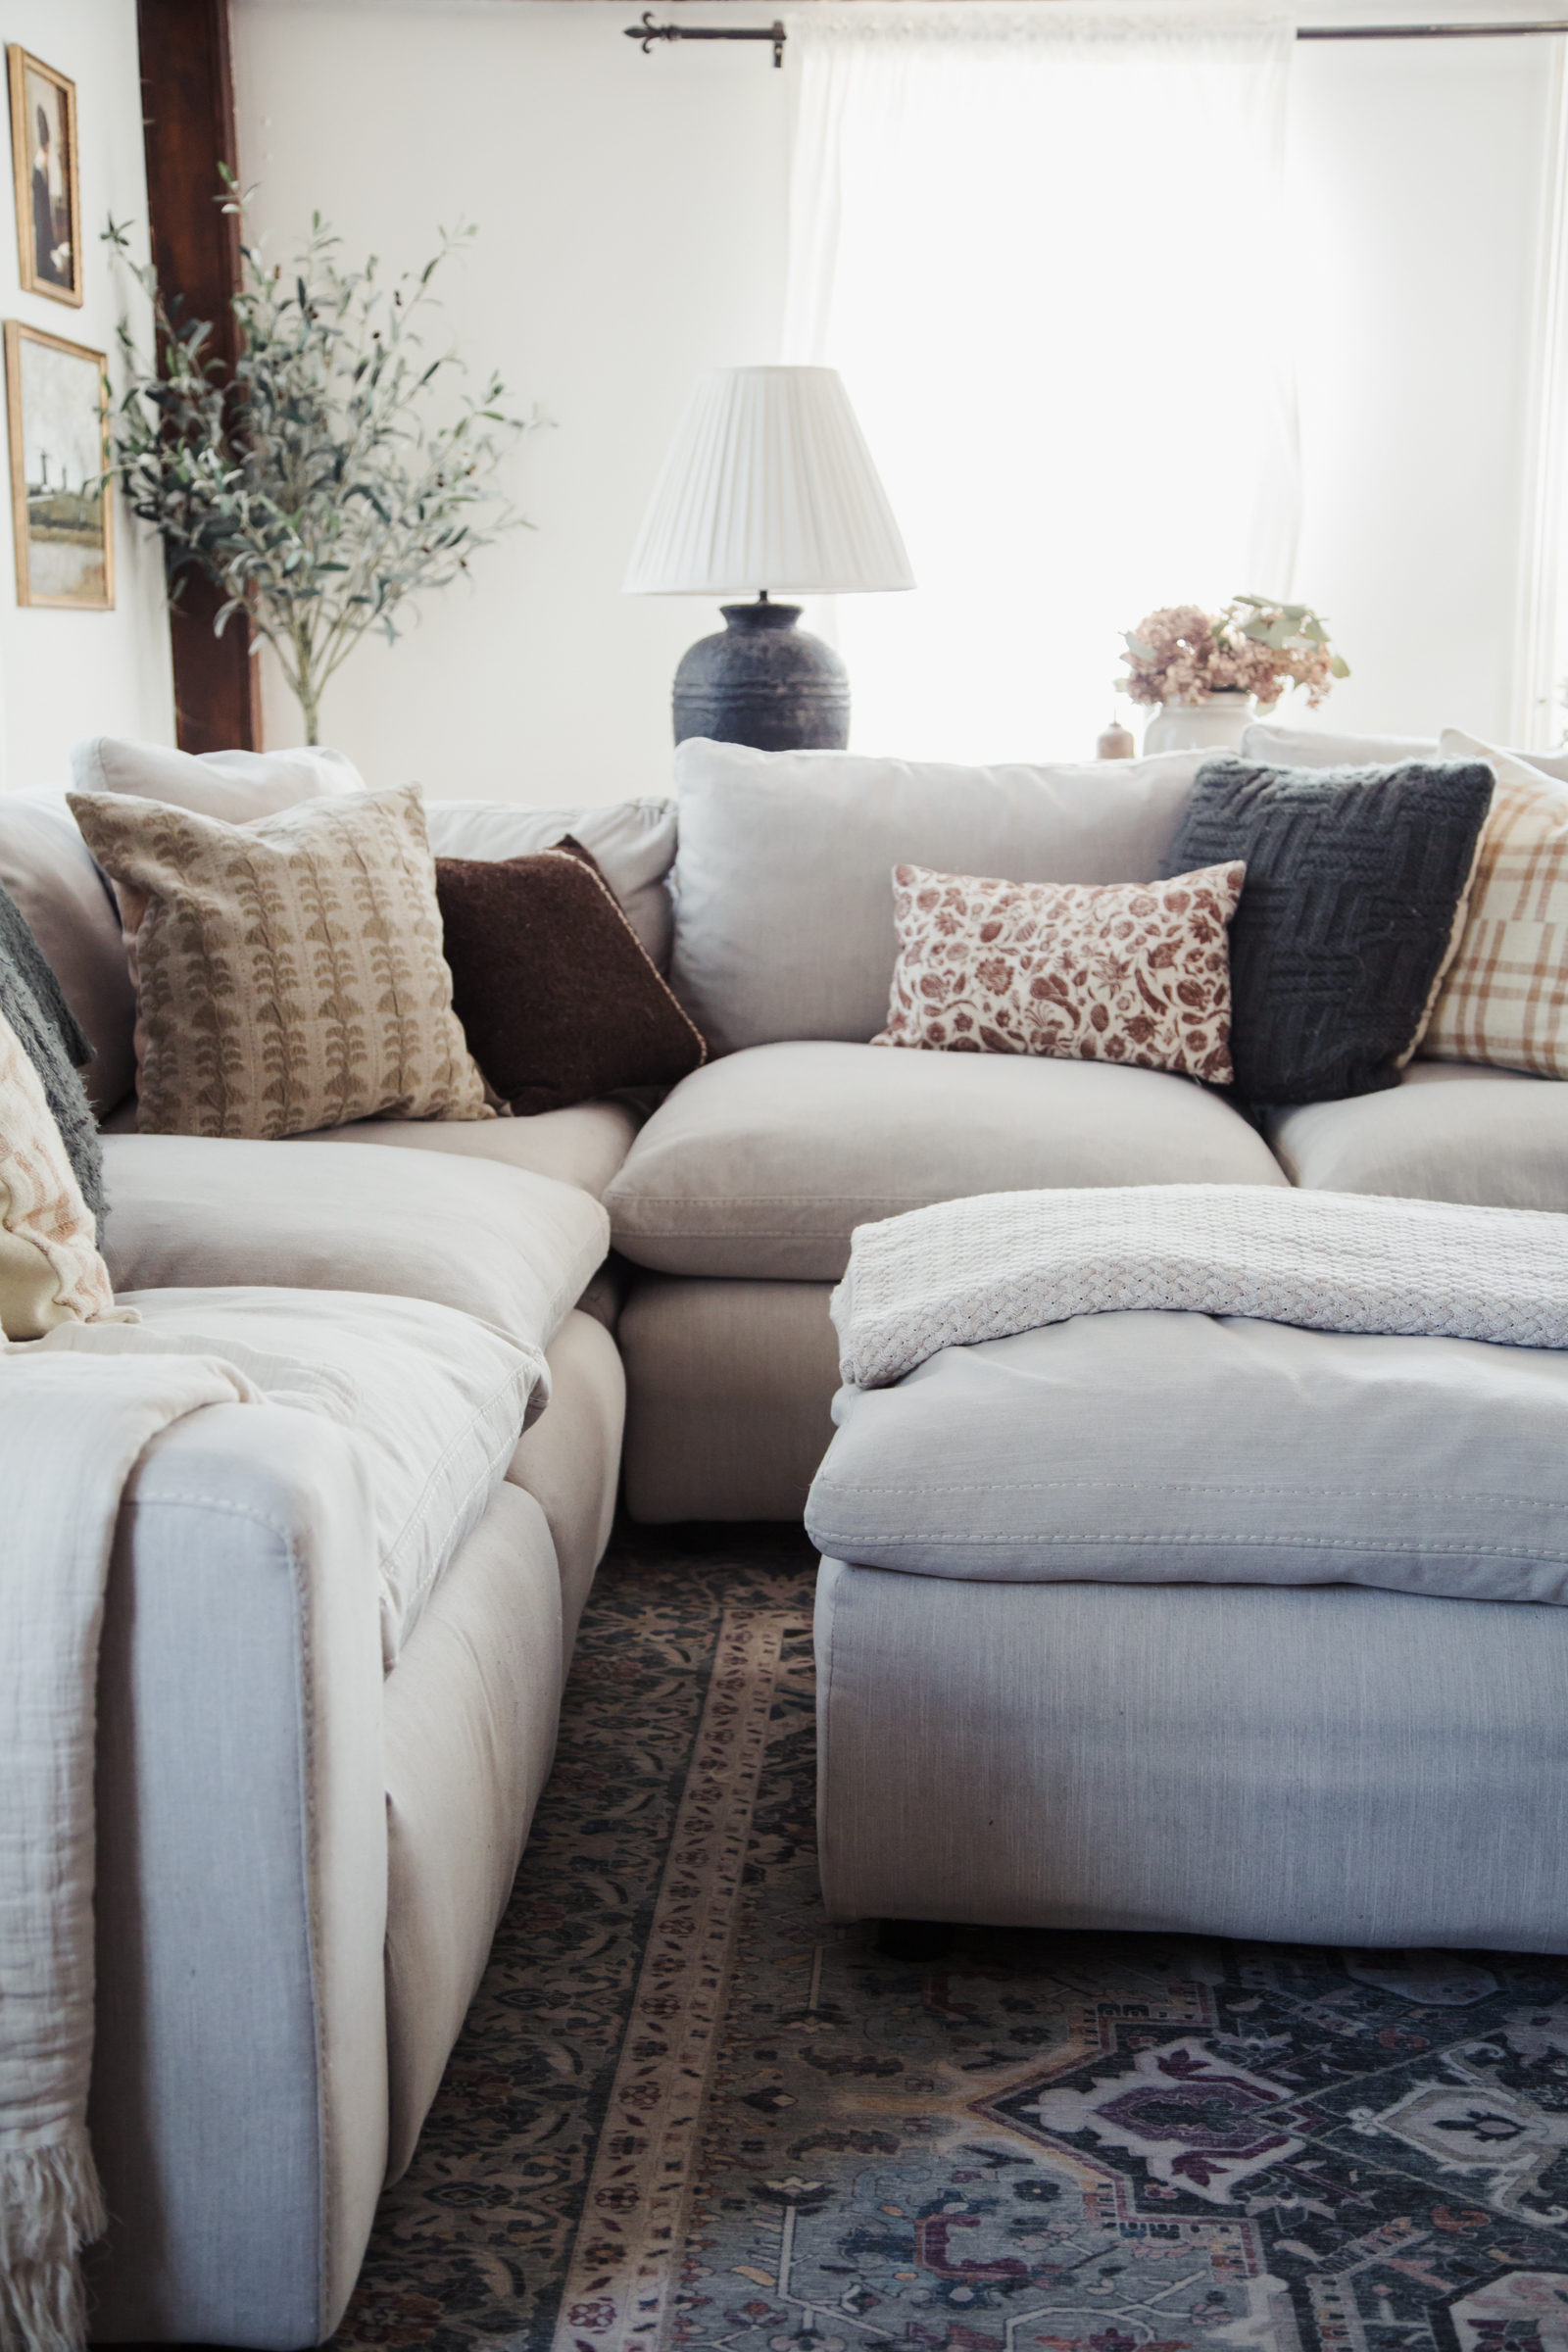 The Rules To Picking The Most Comfortable Sofa (Plus The Ones We Can  Guarantee) - Emily Henderson